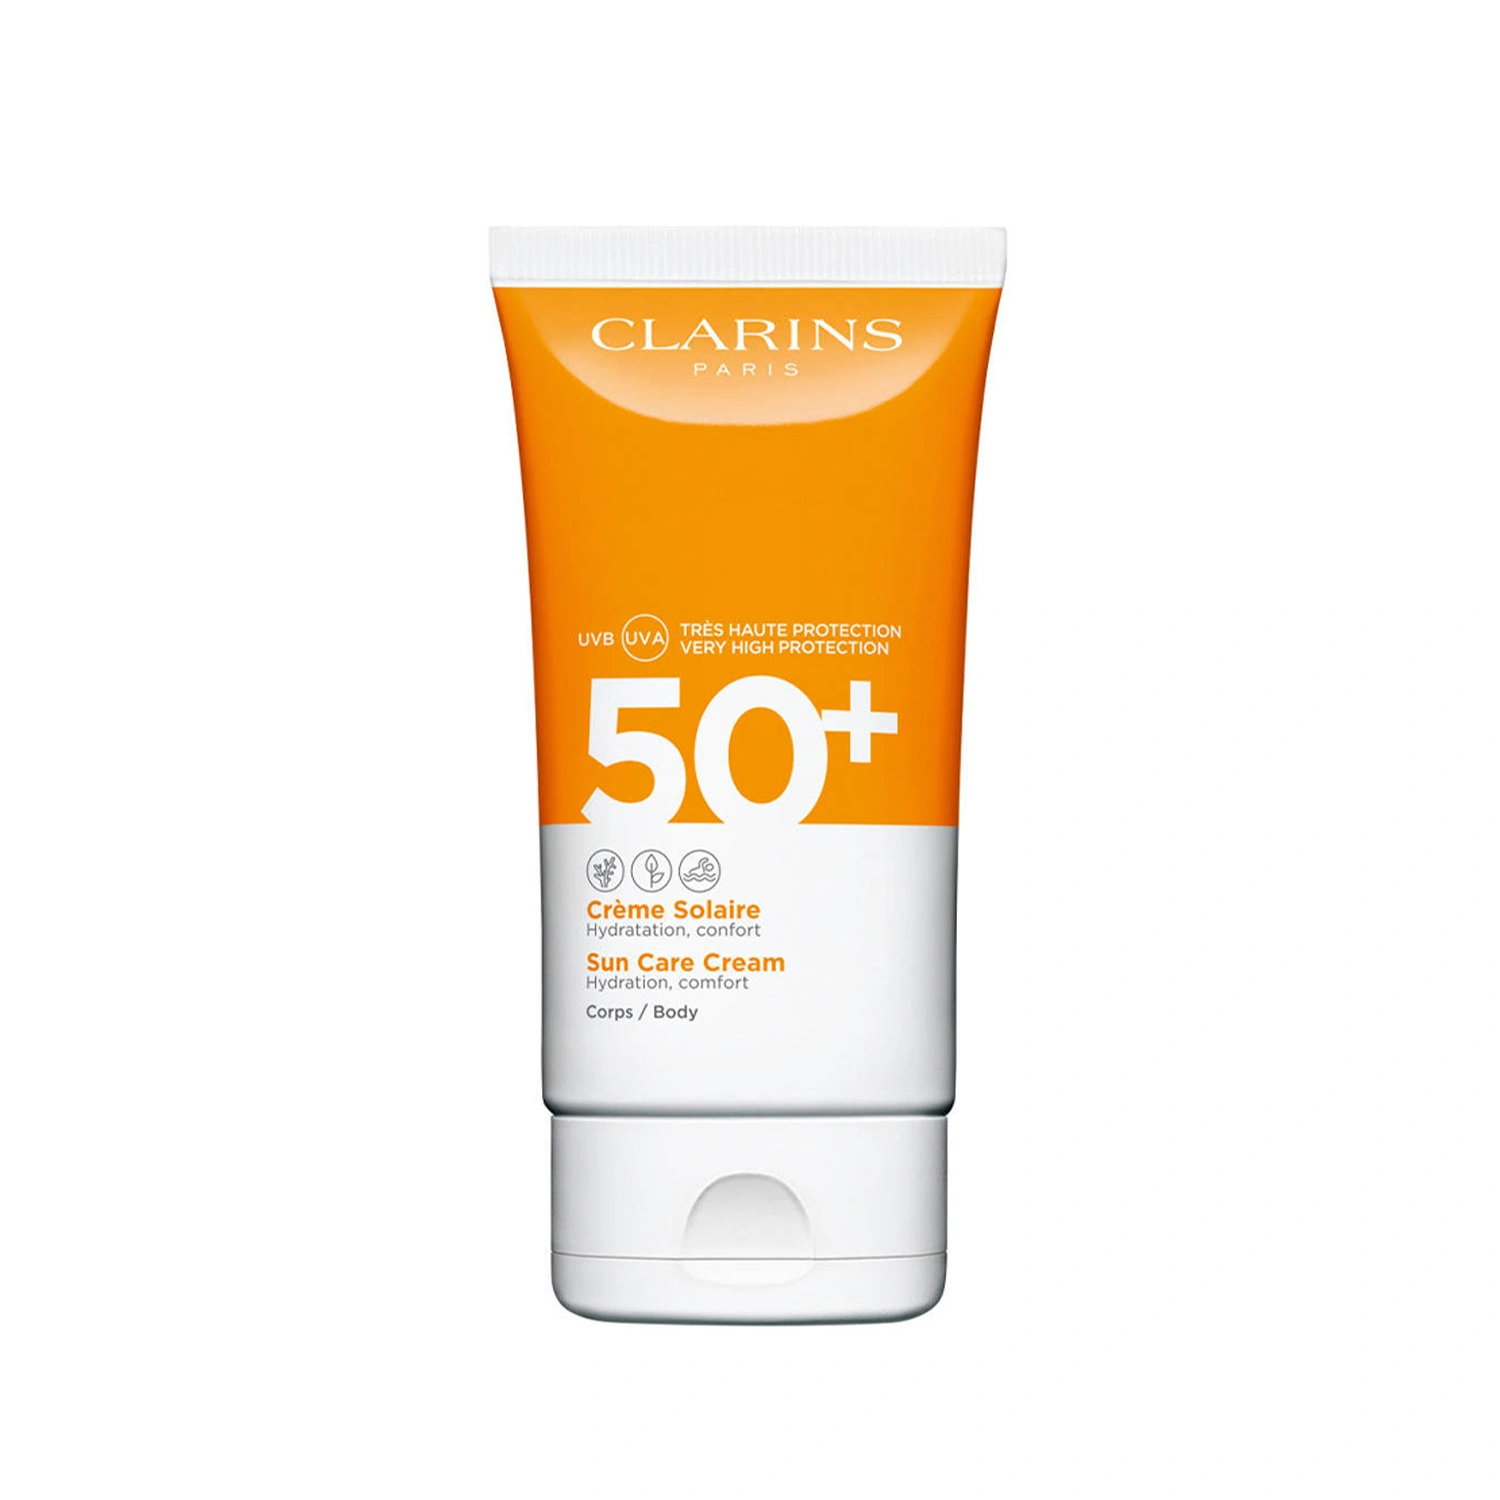 Kiehl's Activated Sun Protector Sunscreen Broad Spectrum SPF 50 Water-Light Lotion for Face and Body